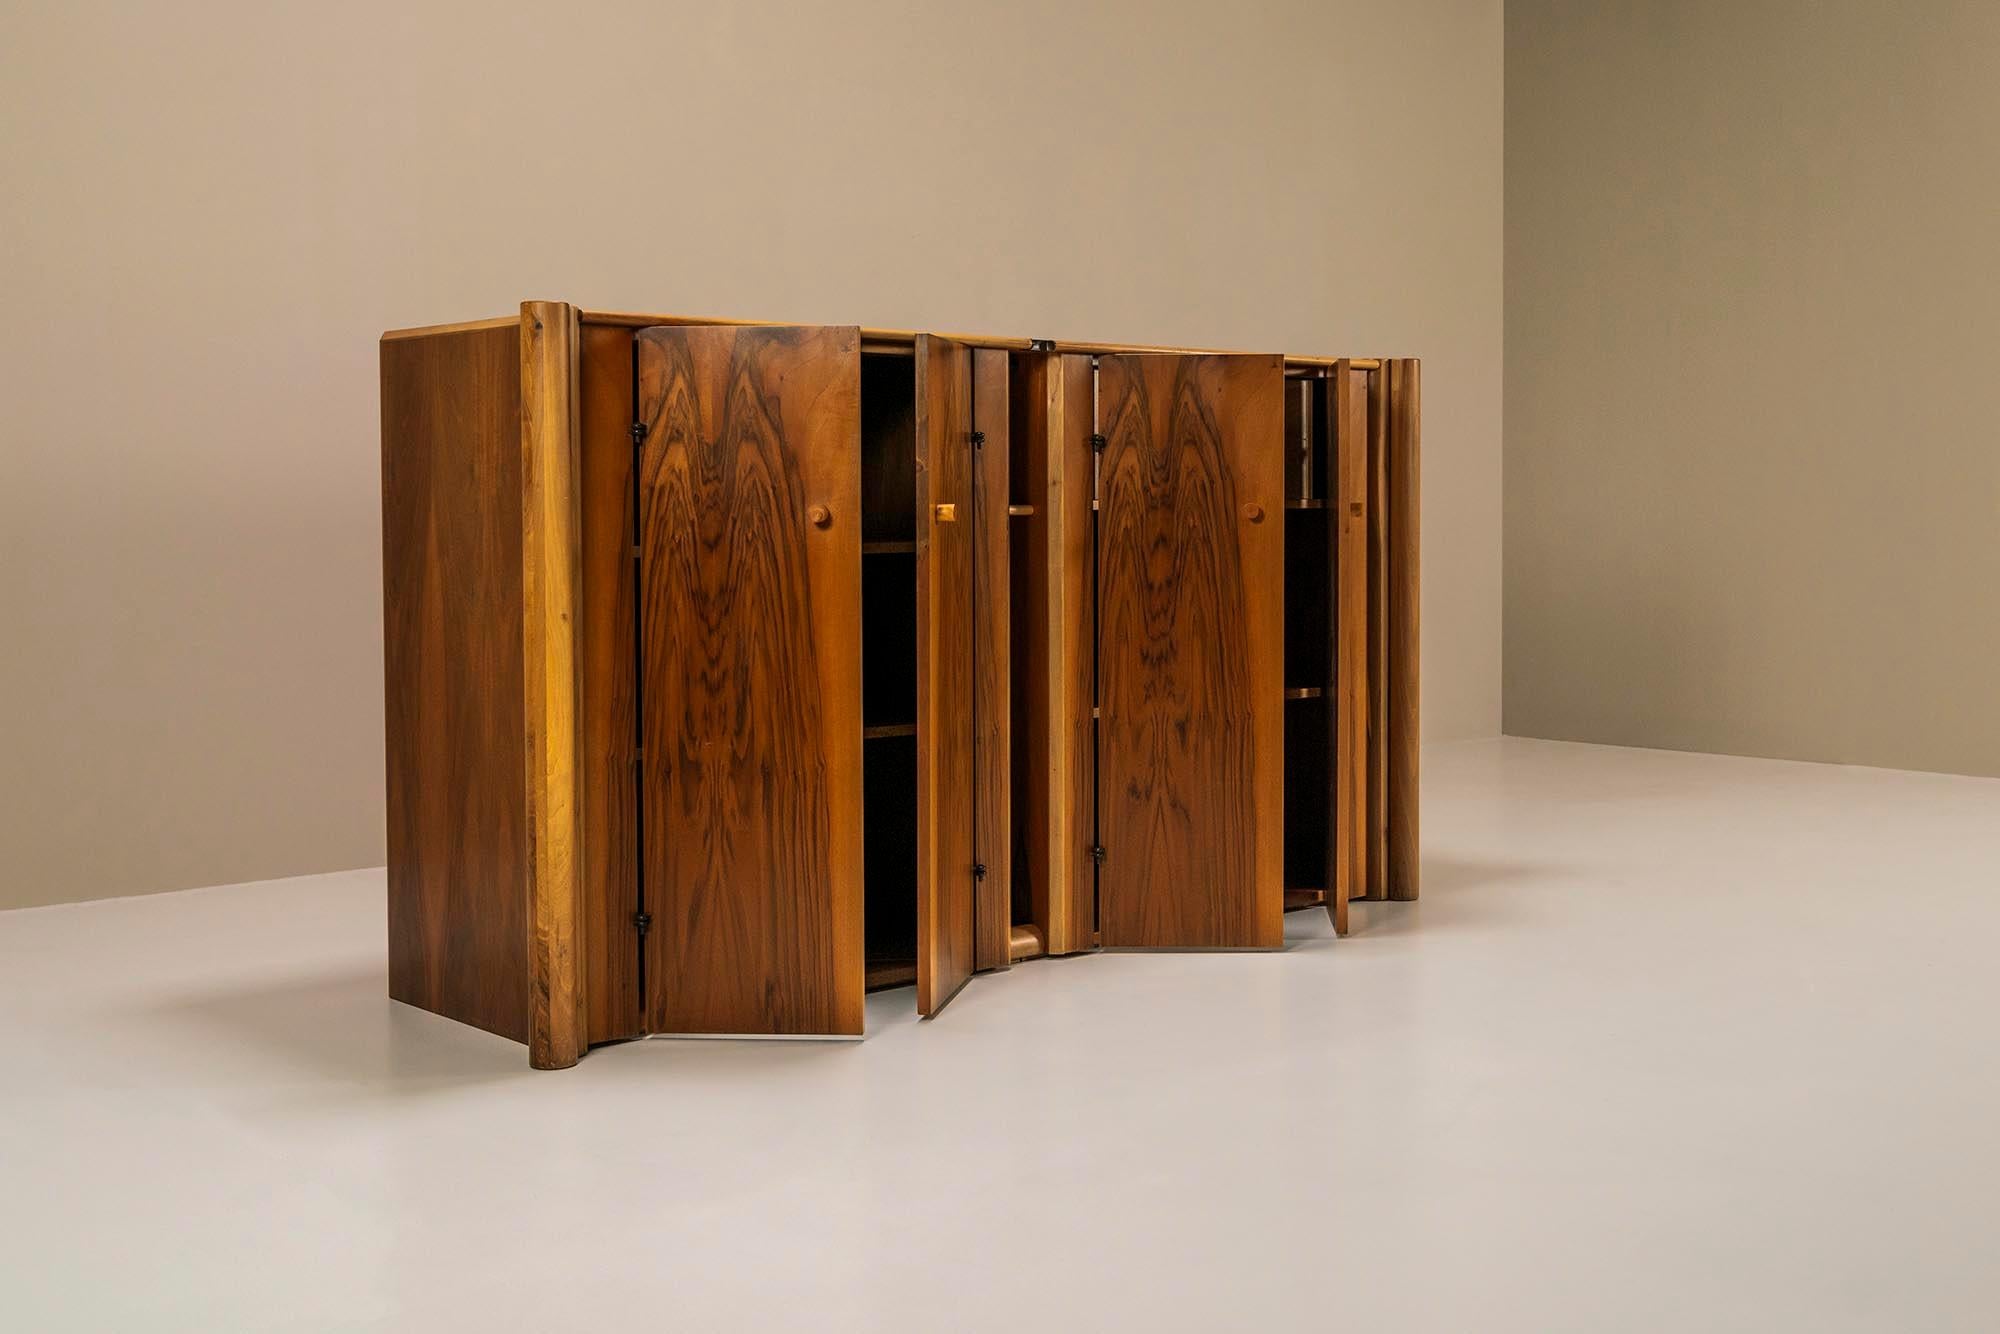 Sideboard “Scuderia” In Walnut By Carlo Scarpa For Bernini, Italy 1977 In Good Condition For Sale In Hellouw, NL